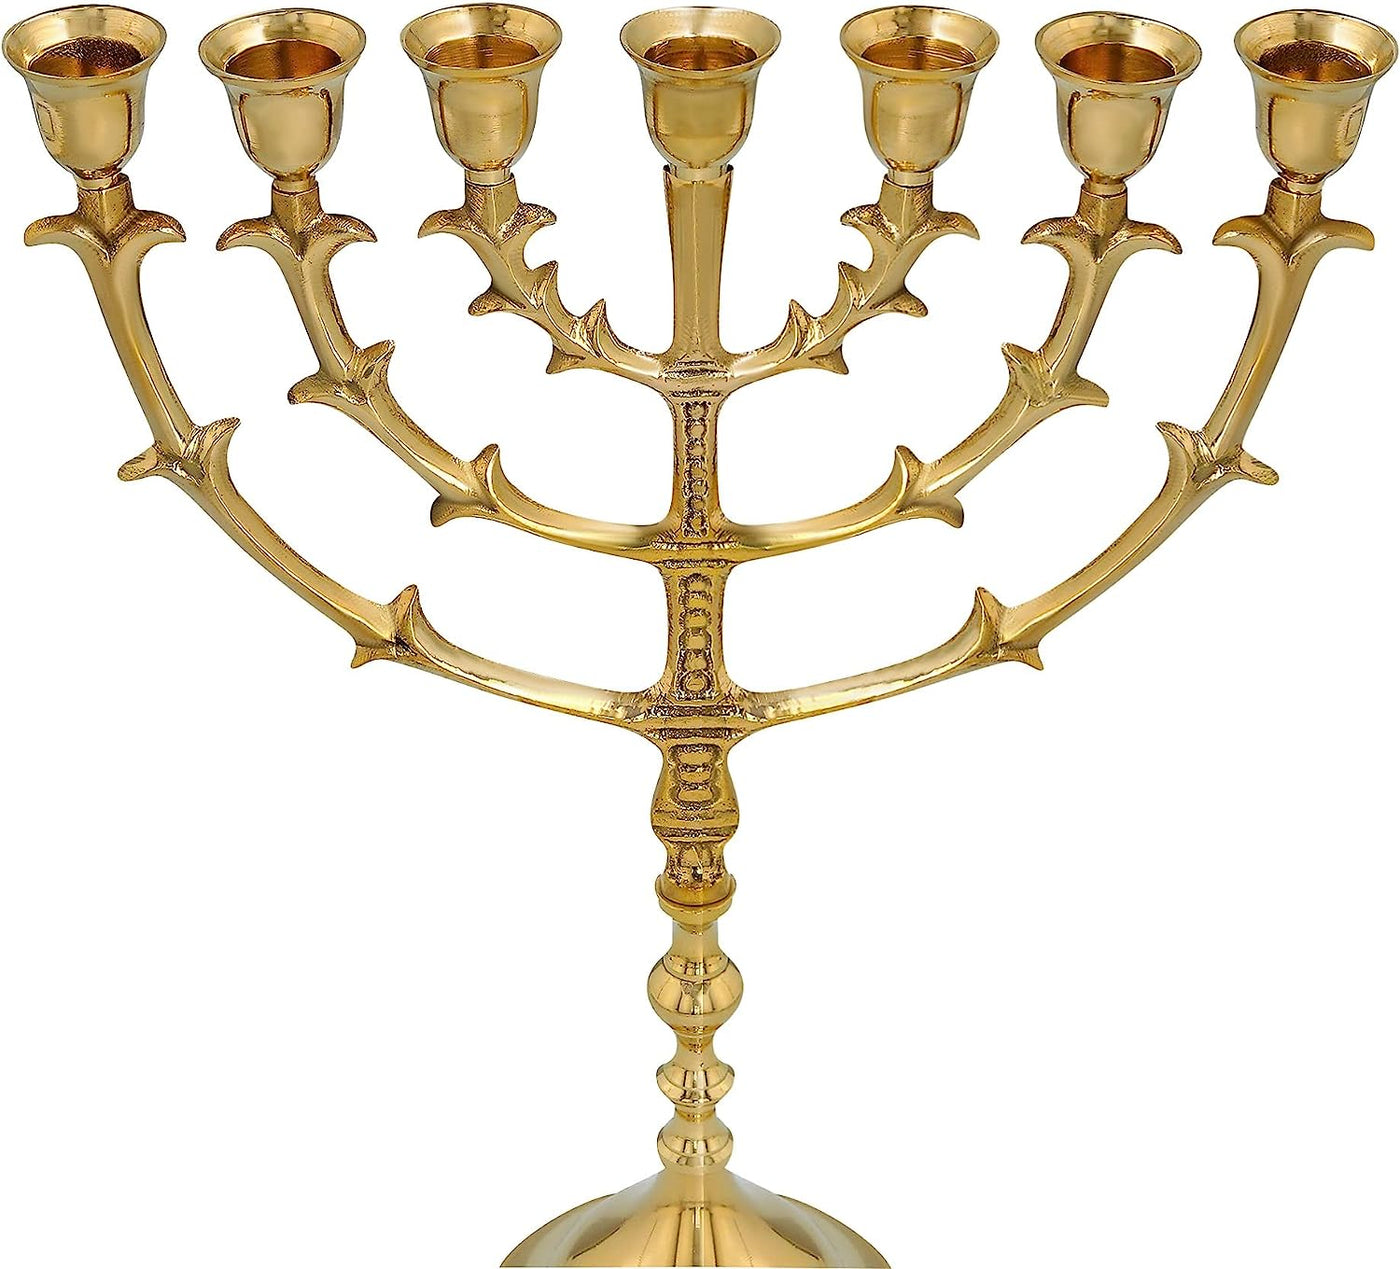 Menorah Solid Brass/Copper 12" inches Bronze 7 Branches Menorah Candle Holder